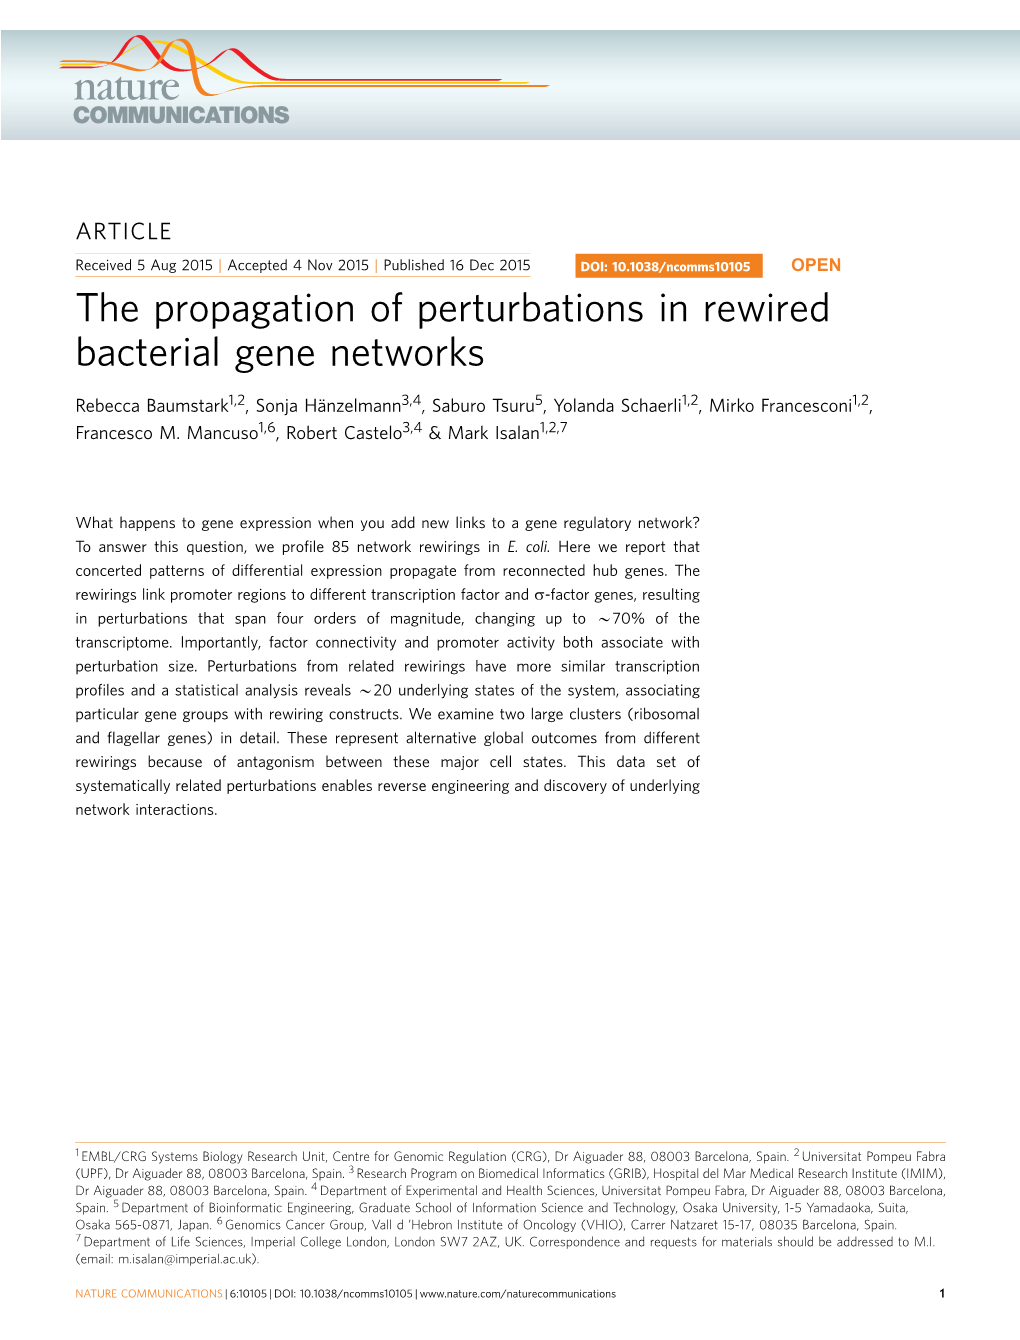 The Propagation of Perturbations in Rewired Bacterial Gene Networks